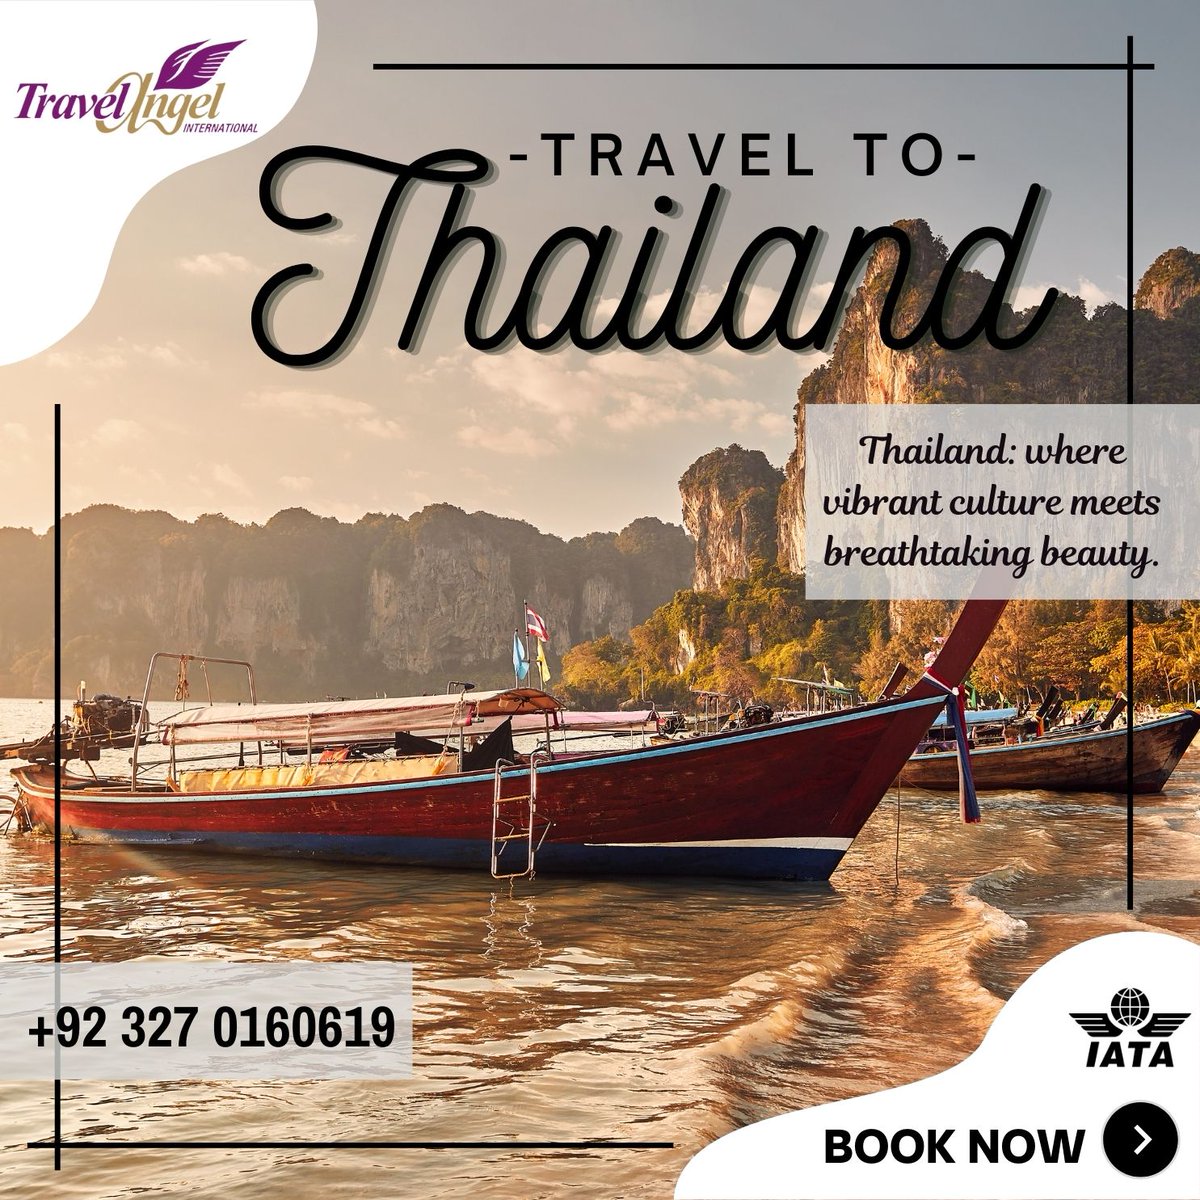 Turn your Thai dreams into reality! 🇹🇭✈️ Excited to share the secret to hassle-free Thailand visit visas – 3 to 10 working days, and you're on your way to explore the wonders of Thailand! 🌏✨

#ThailandVisa #SeamlessTravel #ThaiDreams #VisaAdventure #ExploreThailand #TravelGoals